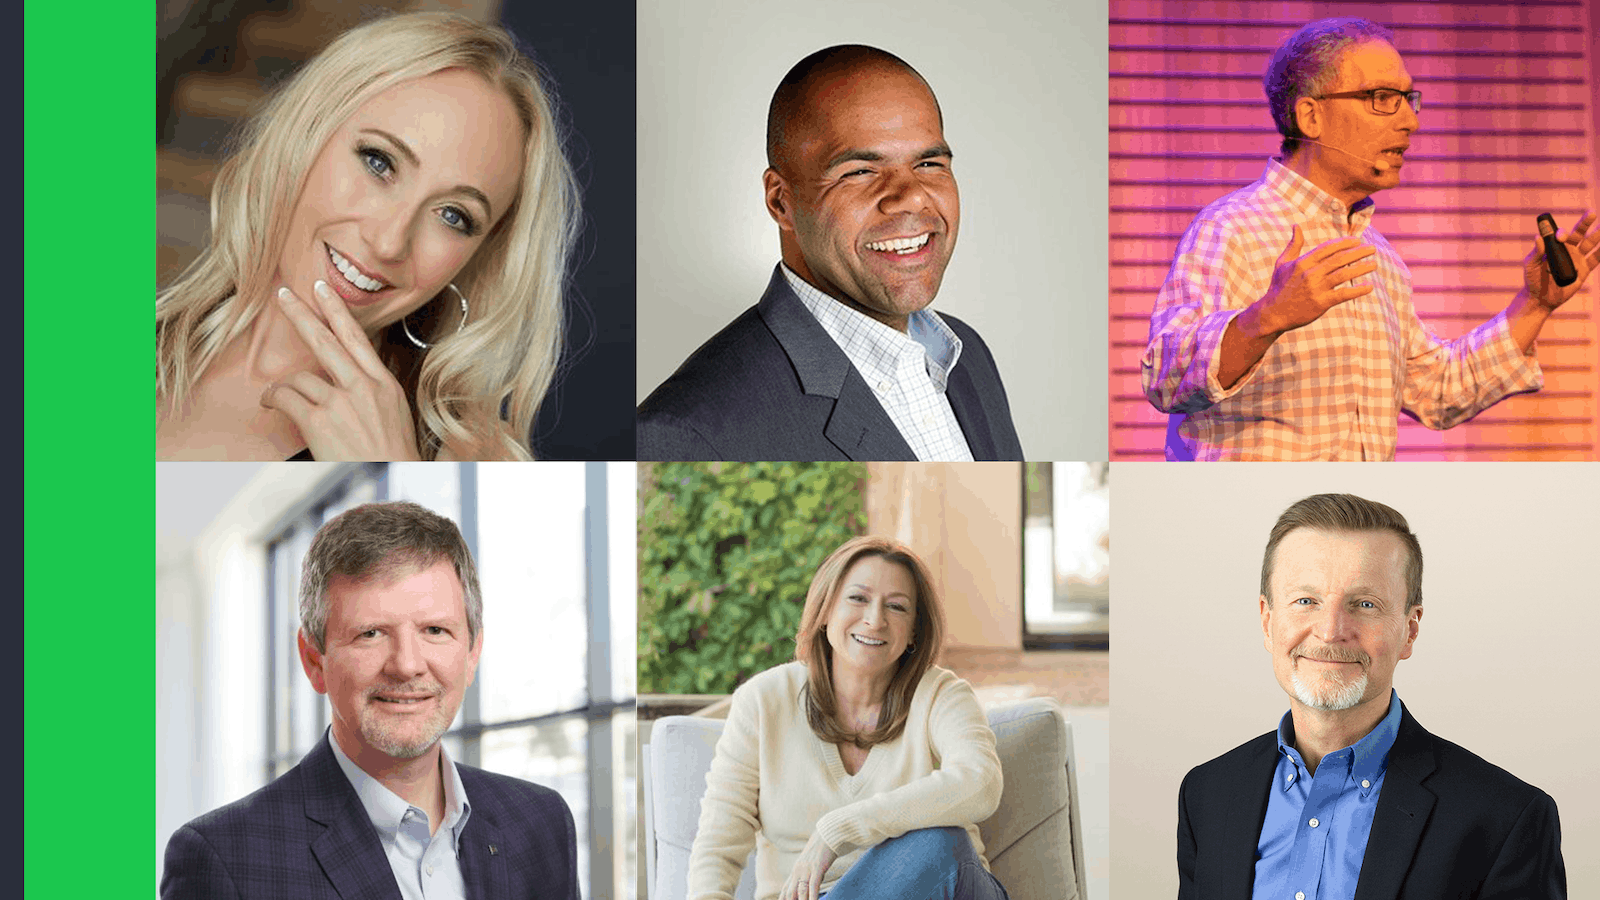 Read full post: 15 Top CX Influencers to Follow